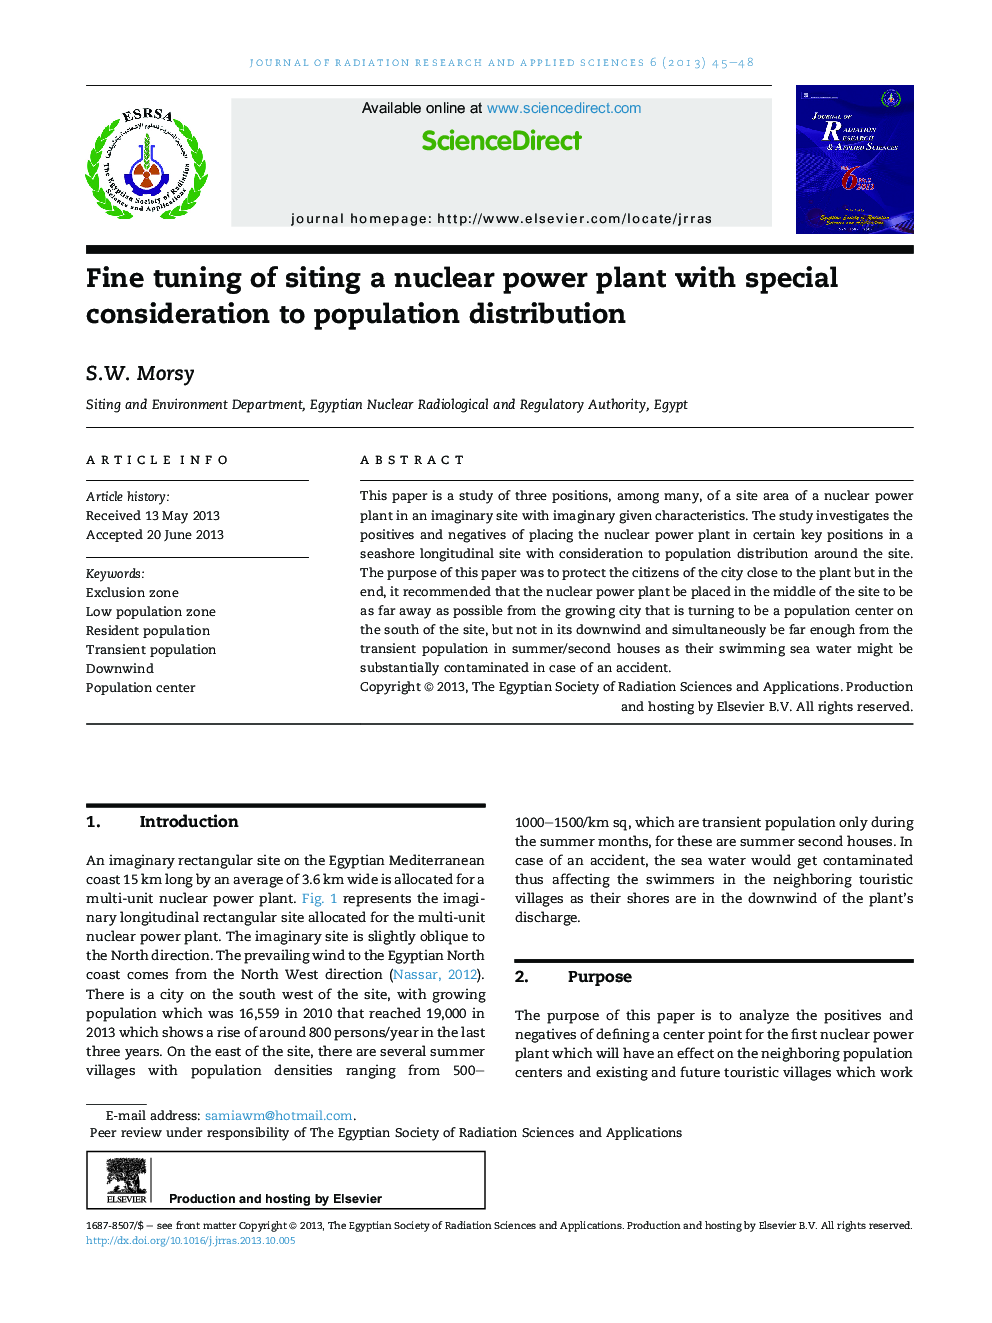 Fine tuning of siting a nuclear power plant with special consideration to population distribution 